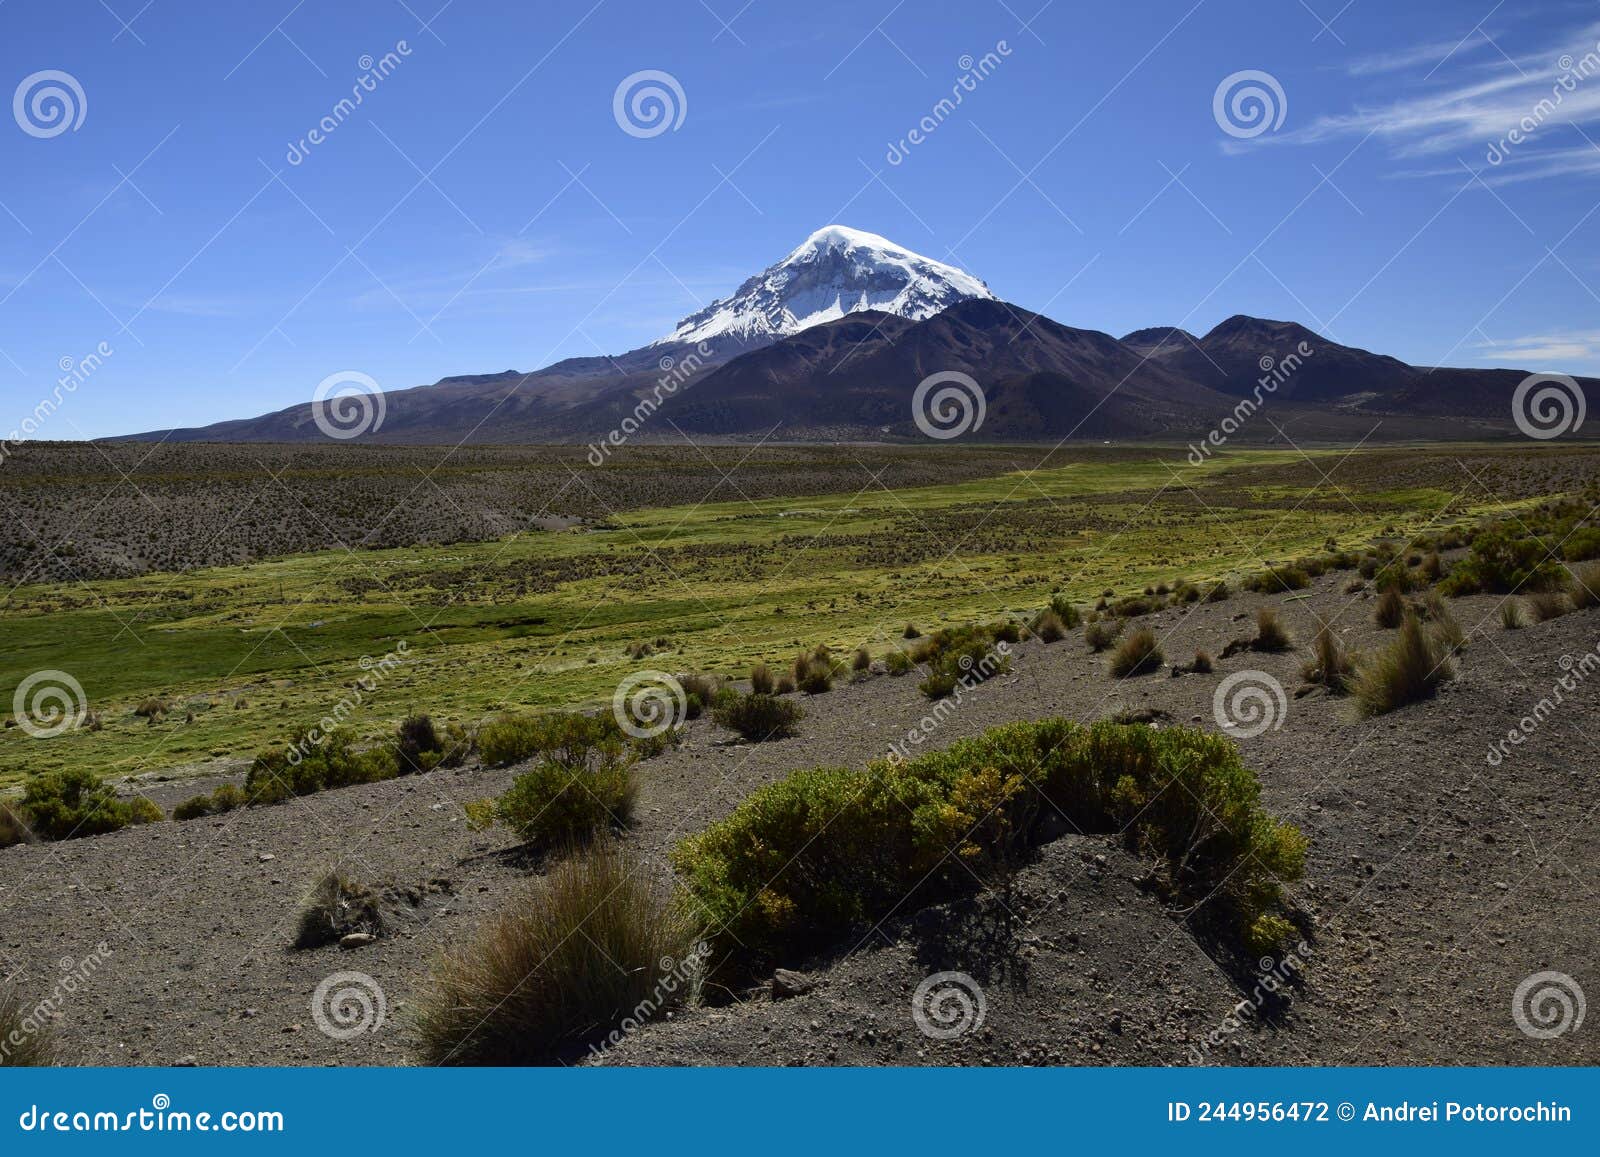 Sajama National Park Surrounded by Snow-capped Mountains with Black ...